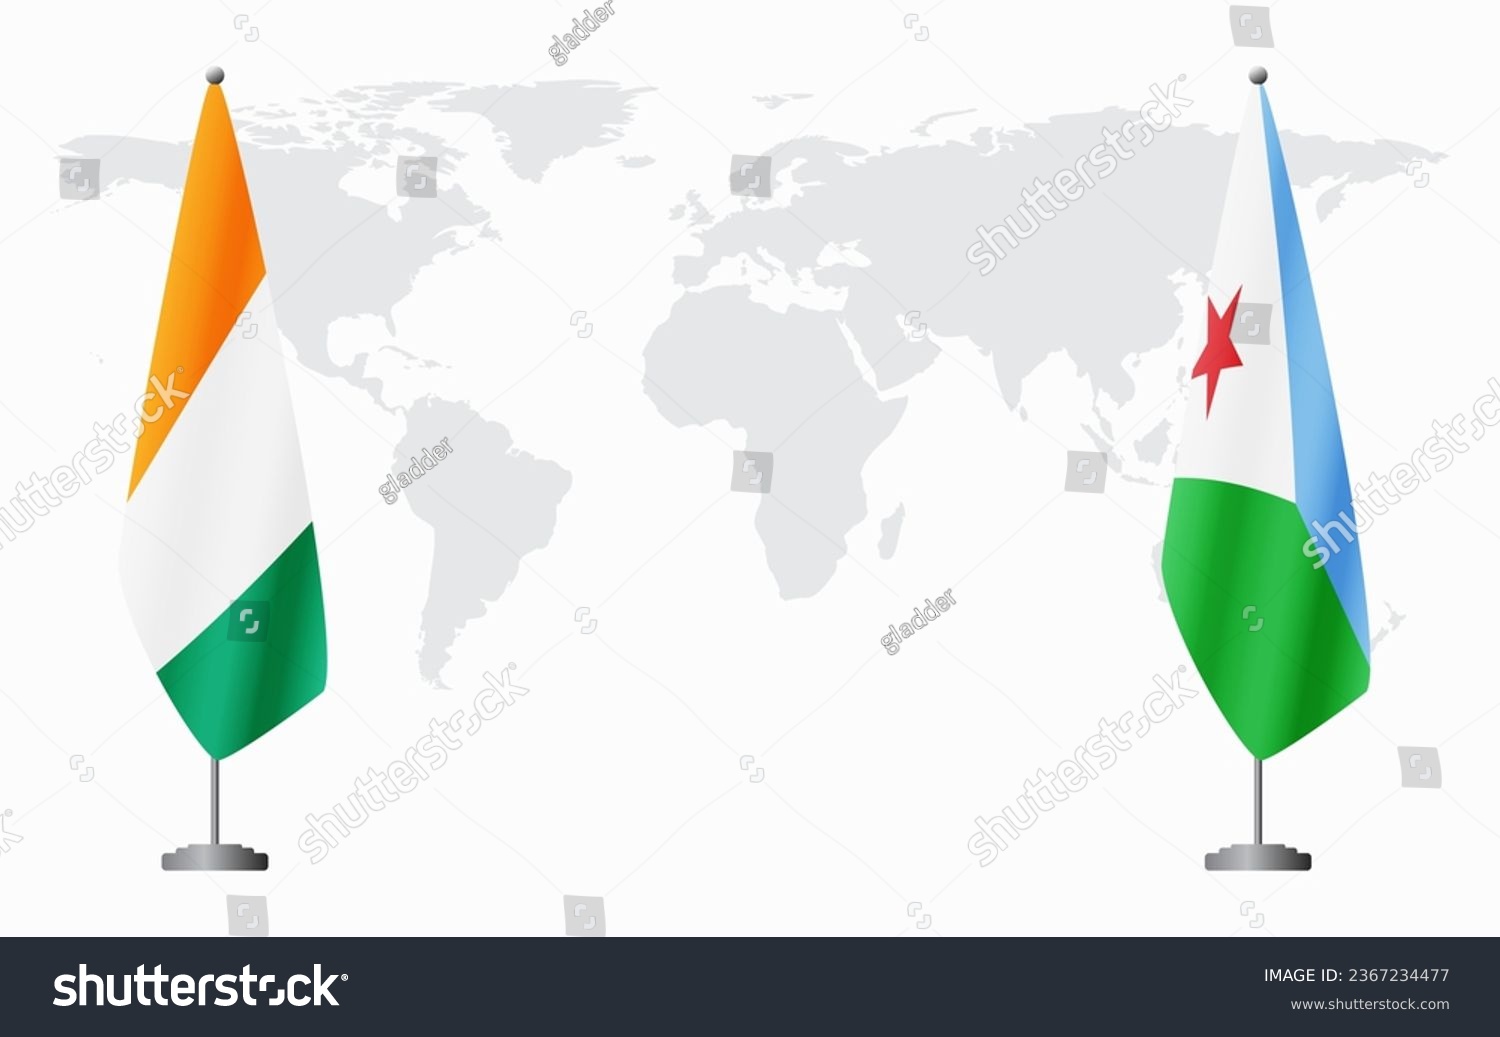 SVG of Ivory Coast and Djibouti flags for official meeting against background of world map. svg